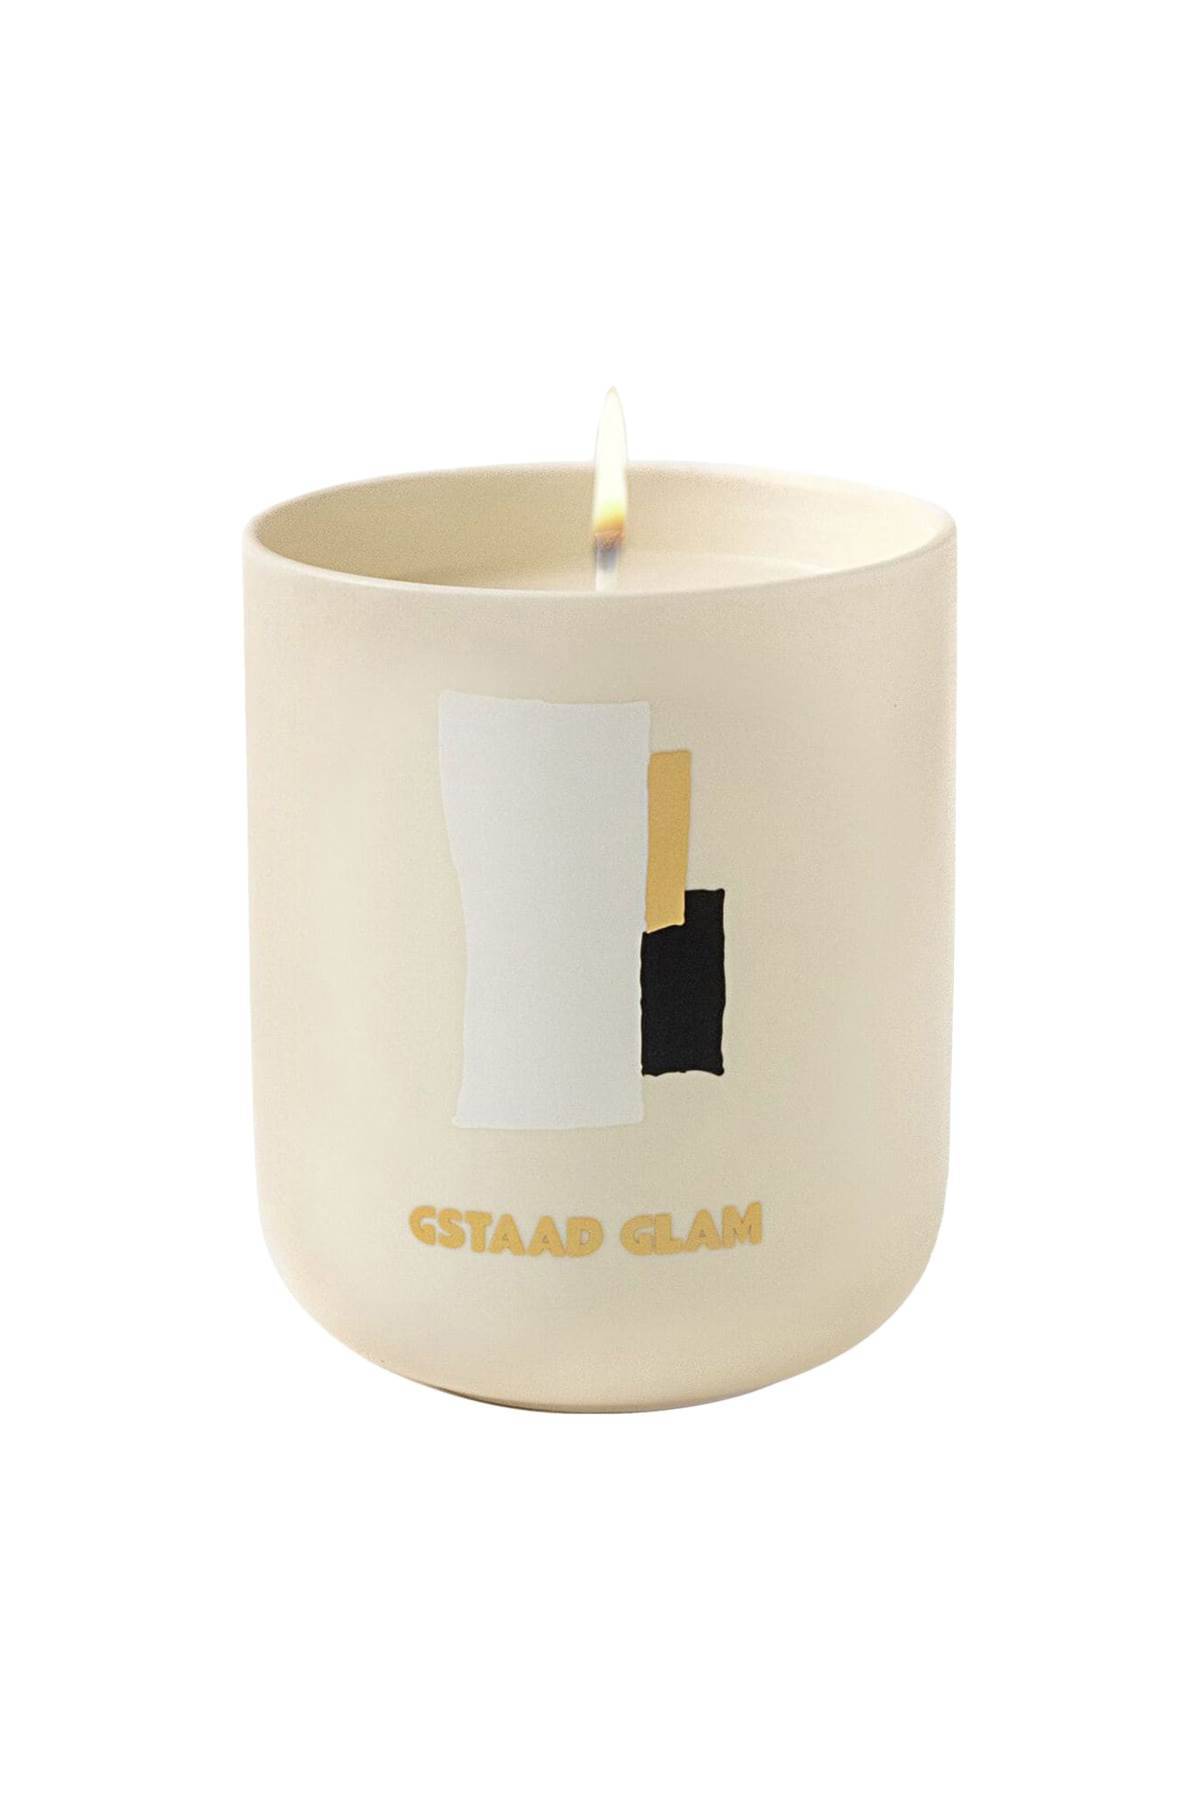 Assouline ASSOULINE gstaad glam scented candle